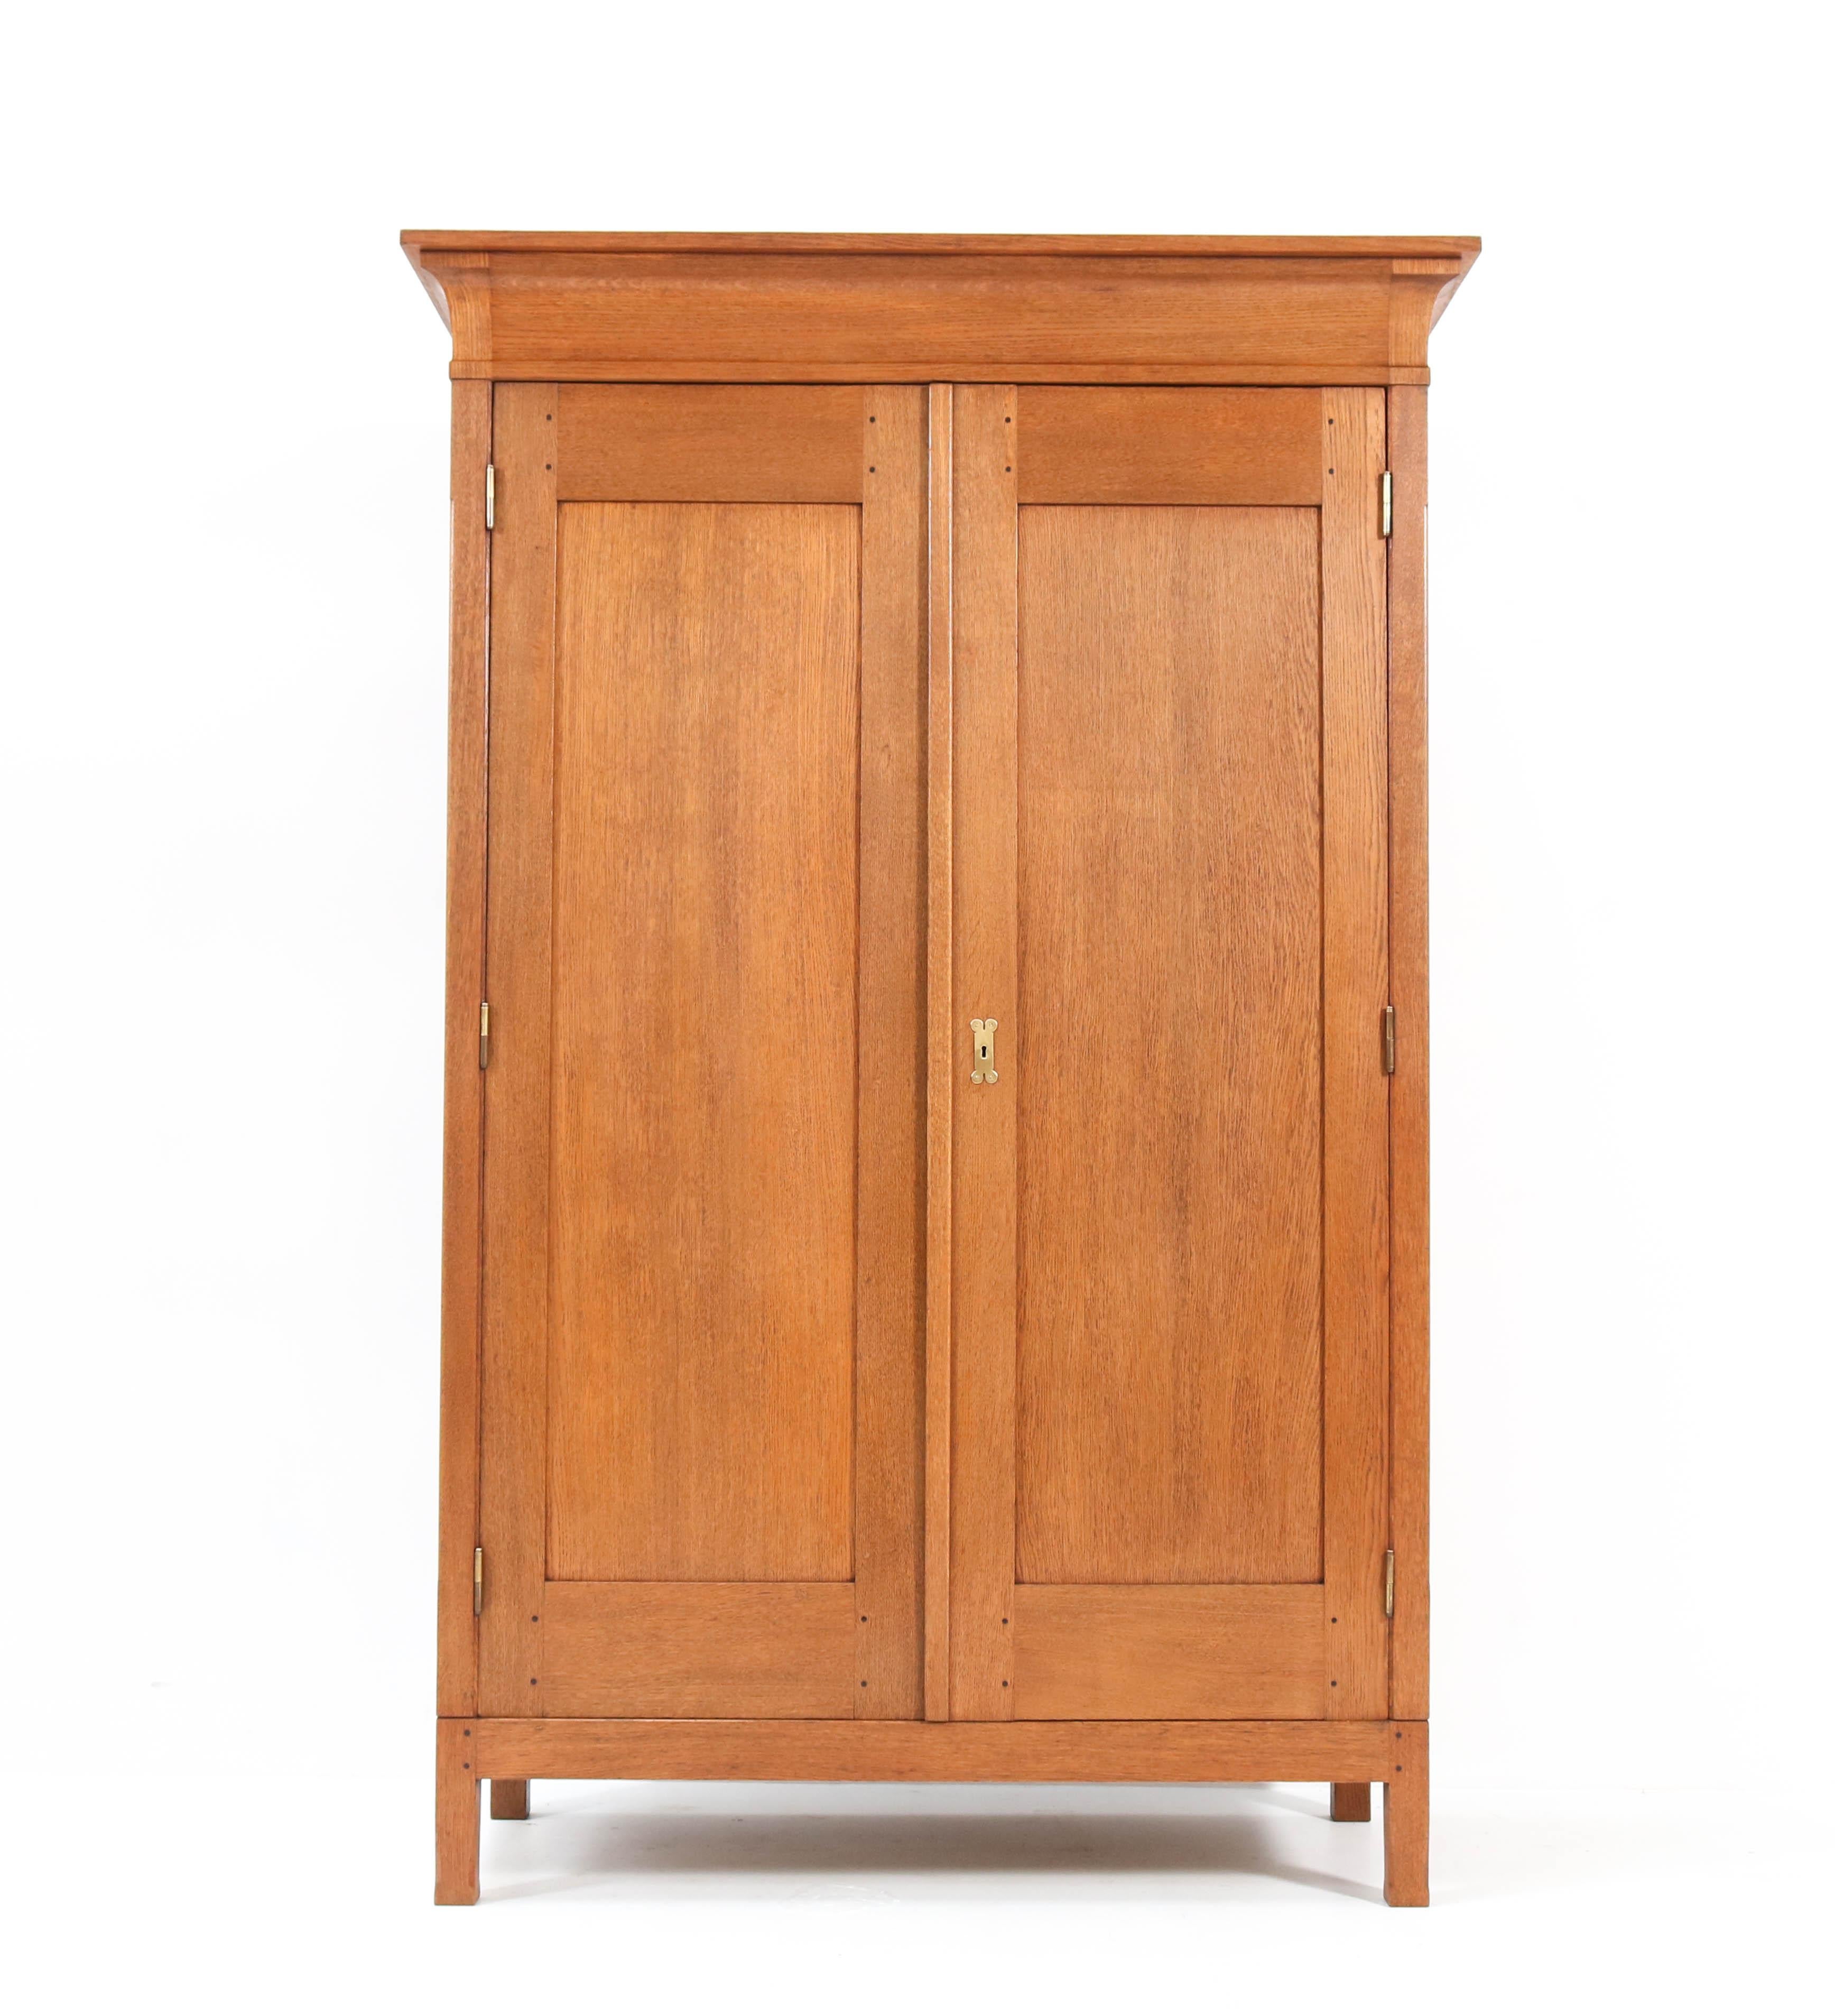 Stunning and rare Arts & Crafts Art Nouveau armoire or wardrobe.
Design by Jac. van den Bosch for 't Binnenhuis Amsterdam.
Striking Dutch design from the 1900s.
Variant Opus nr. 348!
Solid oak with original brass key entrance.
Four original